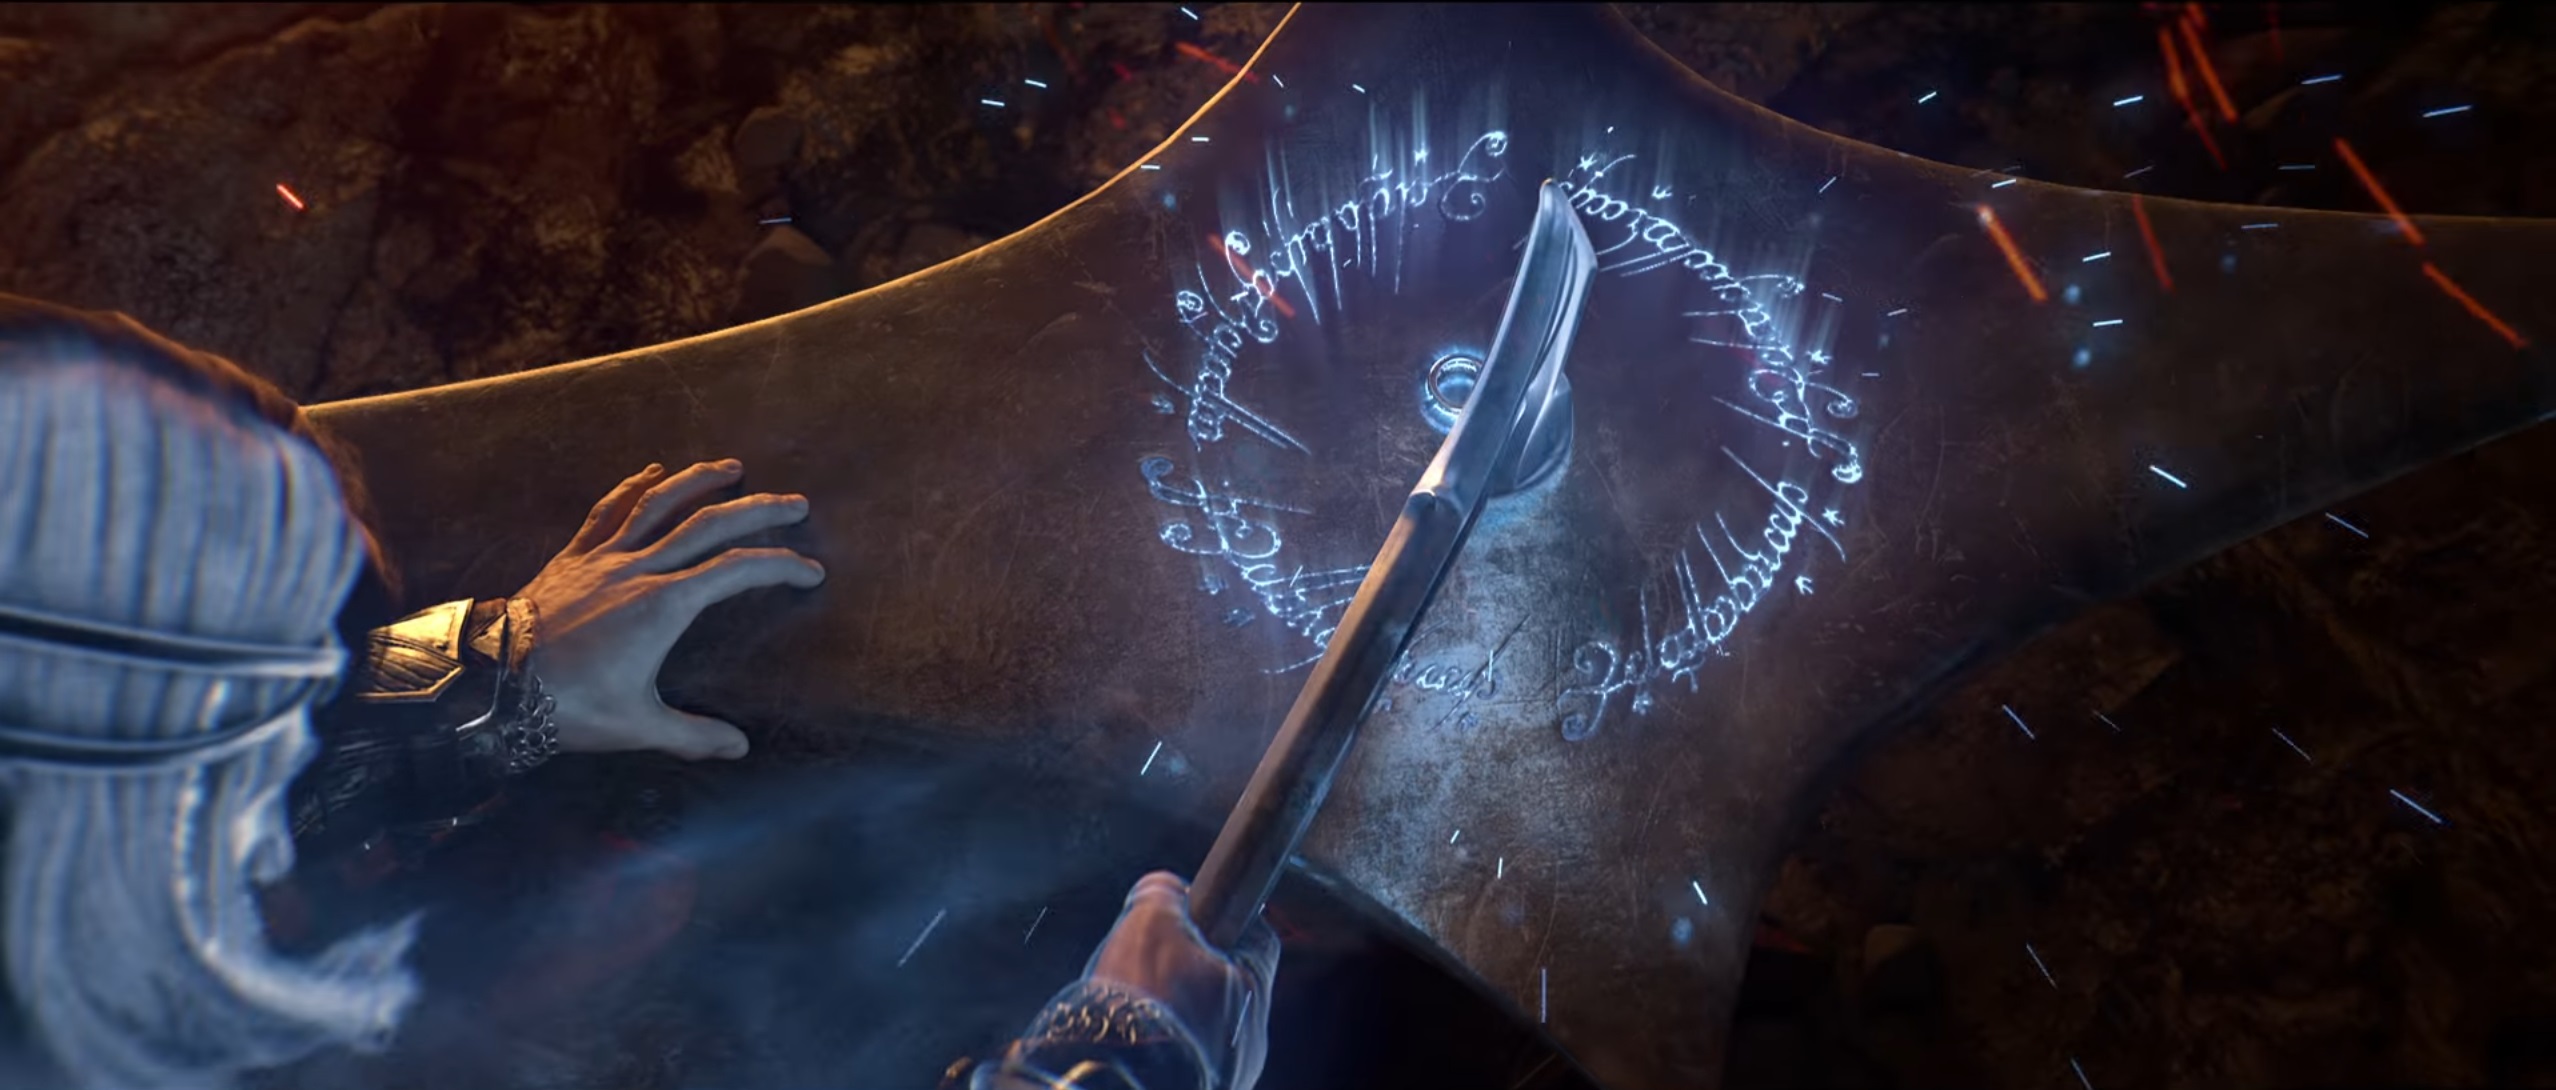 Middle Earth: Shadow of Mordor sequel leaked, set to launch this